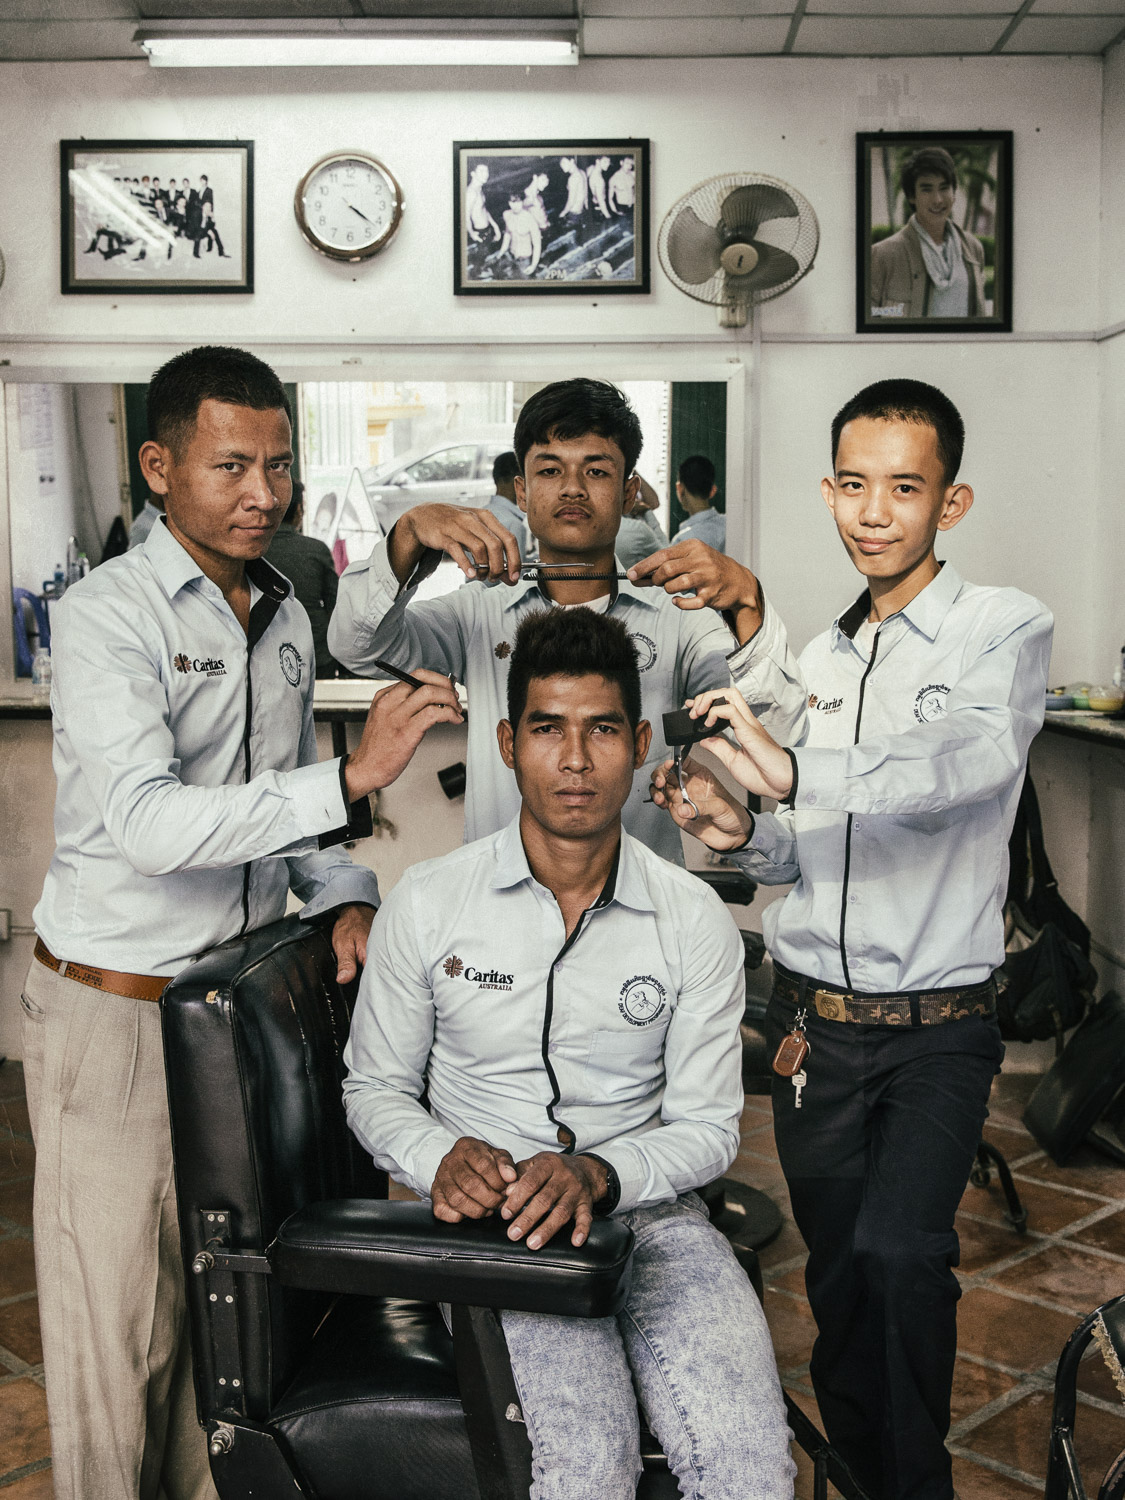  Deaf students at the barber vocational school located in the bottom floor of DDP's Phnom Penh center. Local people often use the services of the barbers at the training center which doubles as a barbershop. 